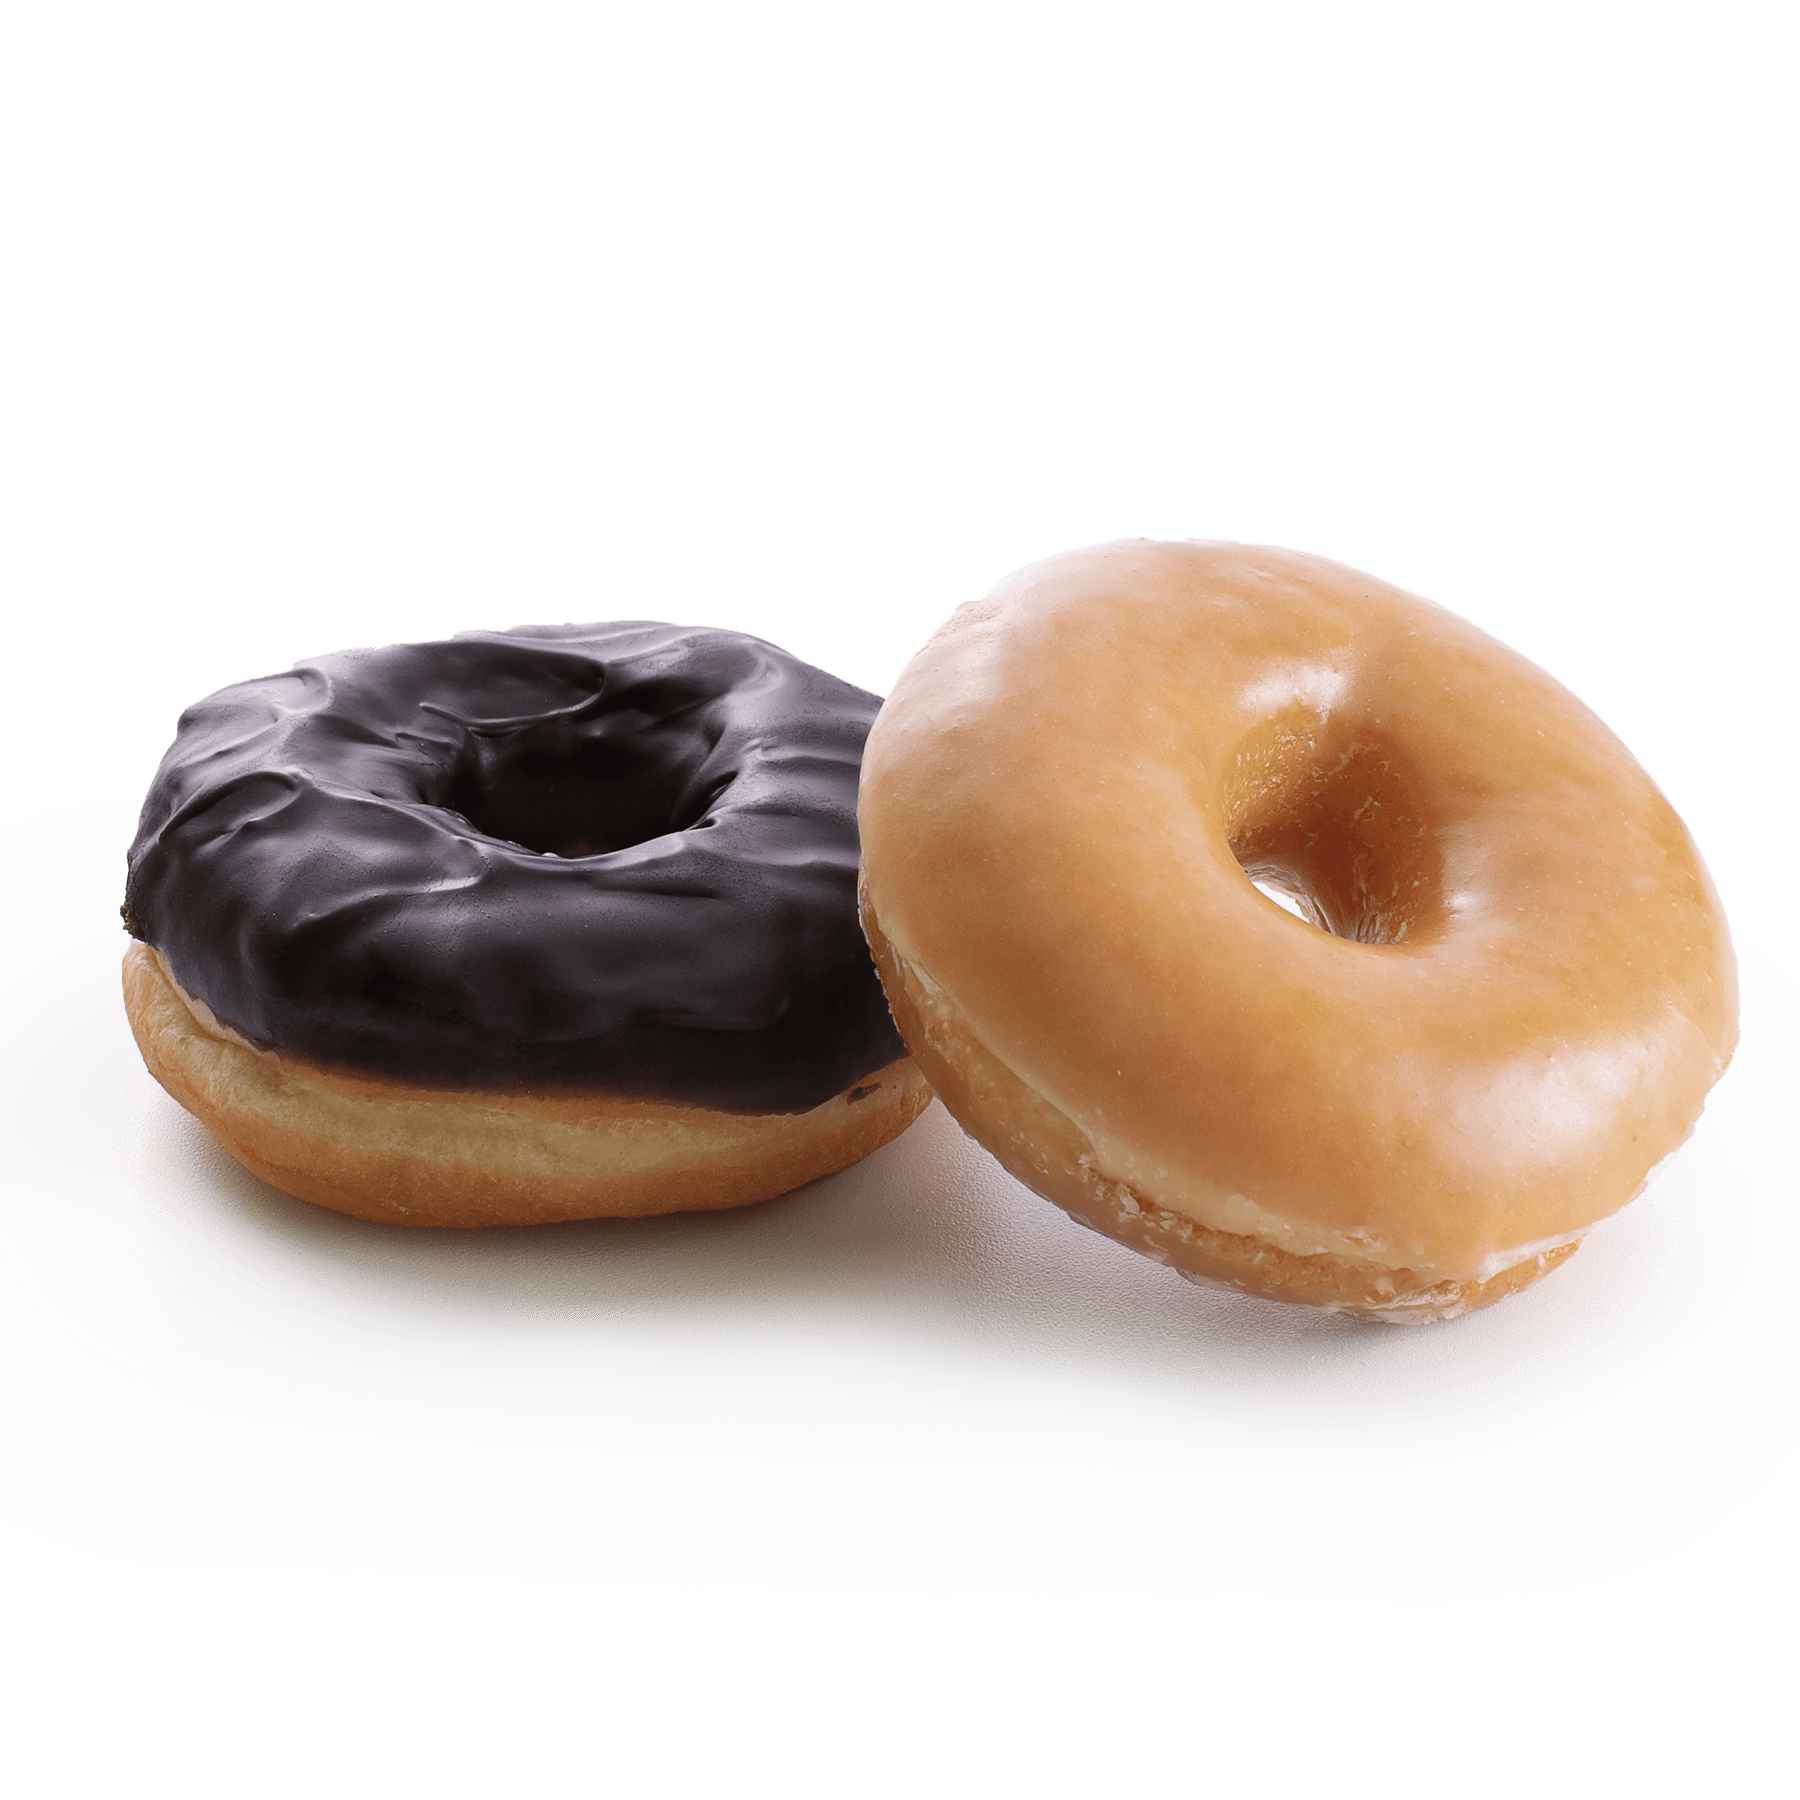 Celebrate National Donut Day With Free Donuts